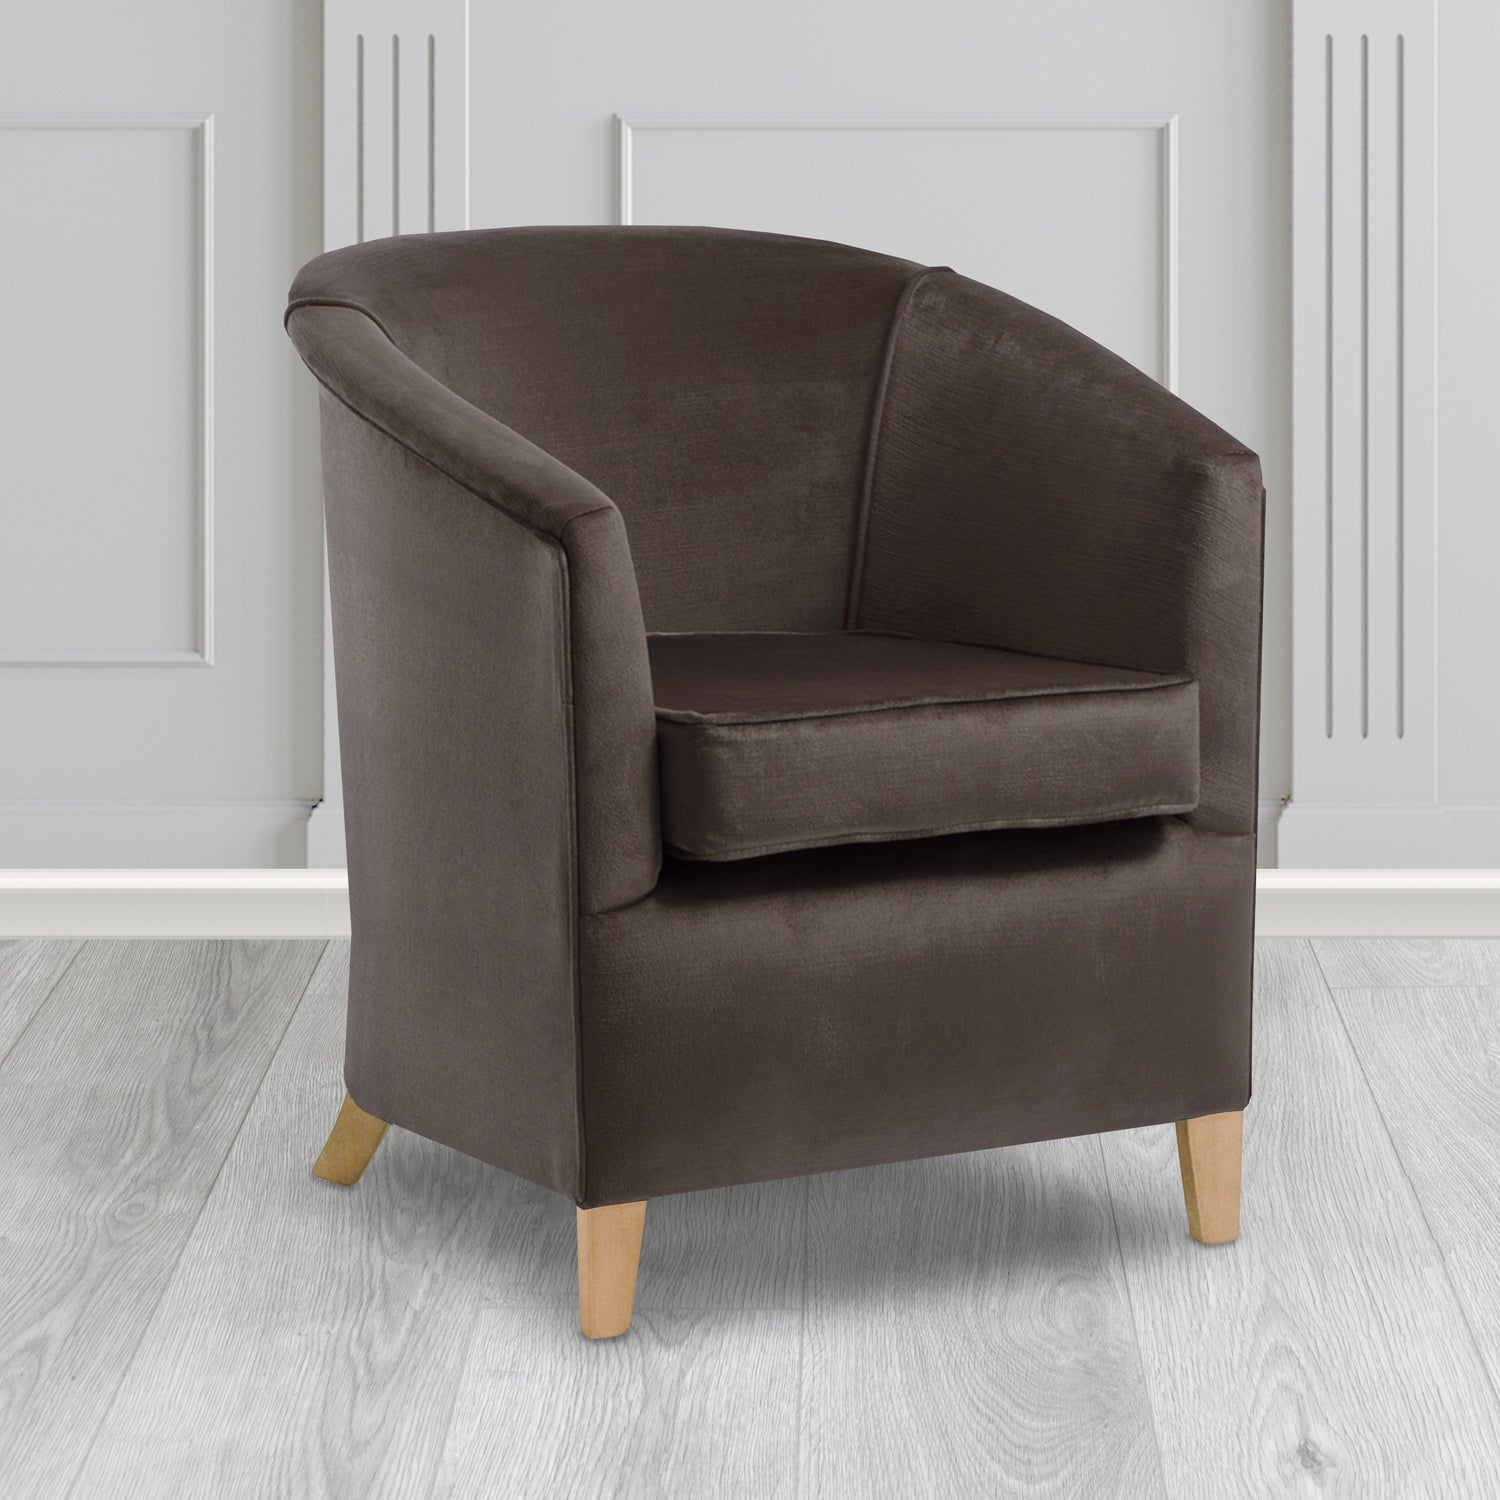 Jasmine Tub Chair in Noble 903 Charcoal Crib 5 Velvet Fabric - Water Resistant - The Tub Chair Shop